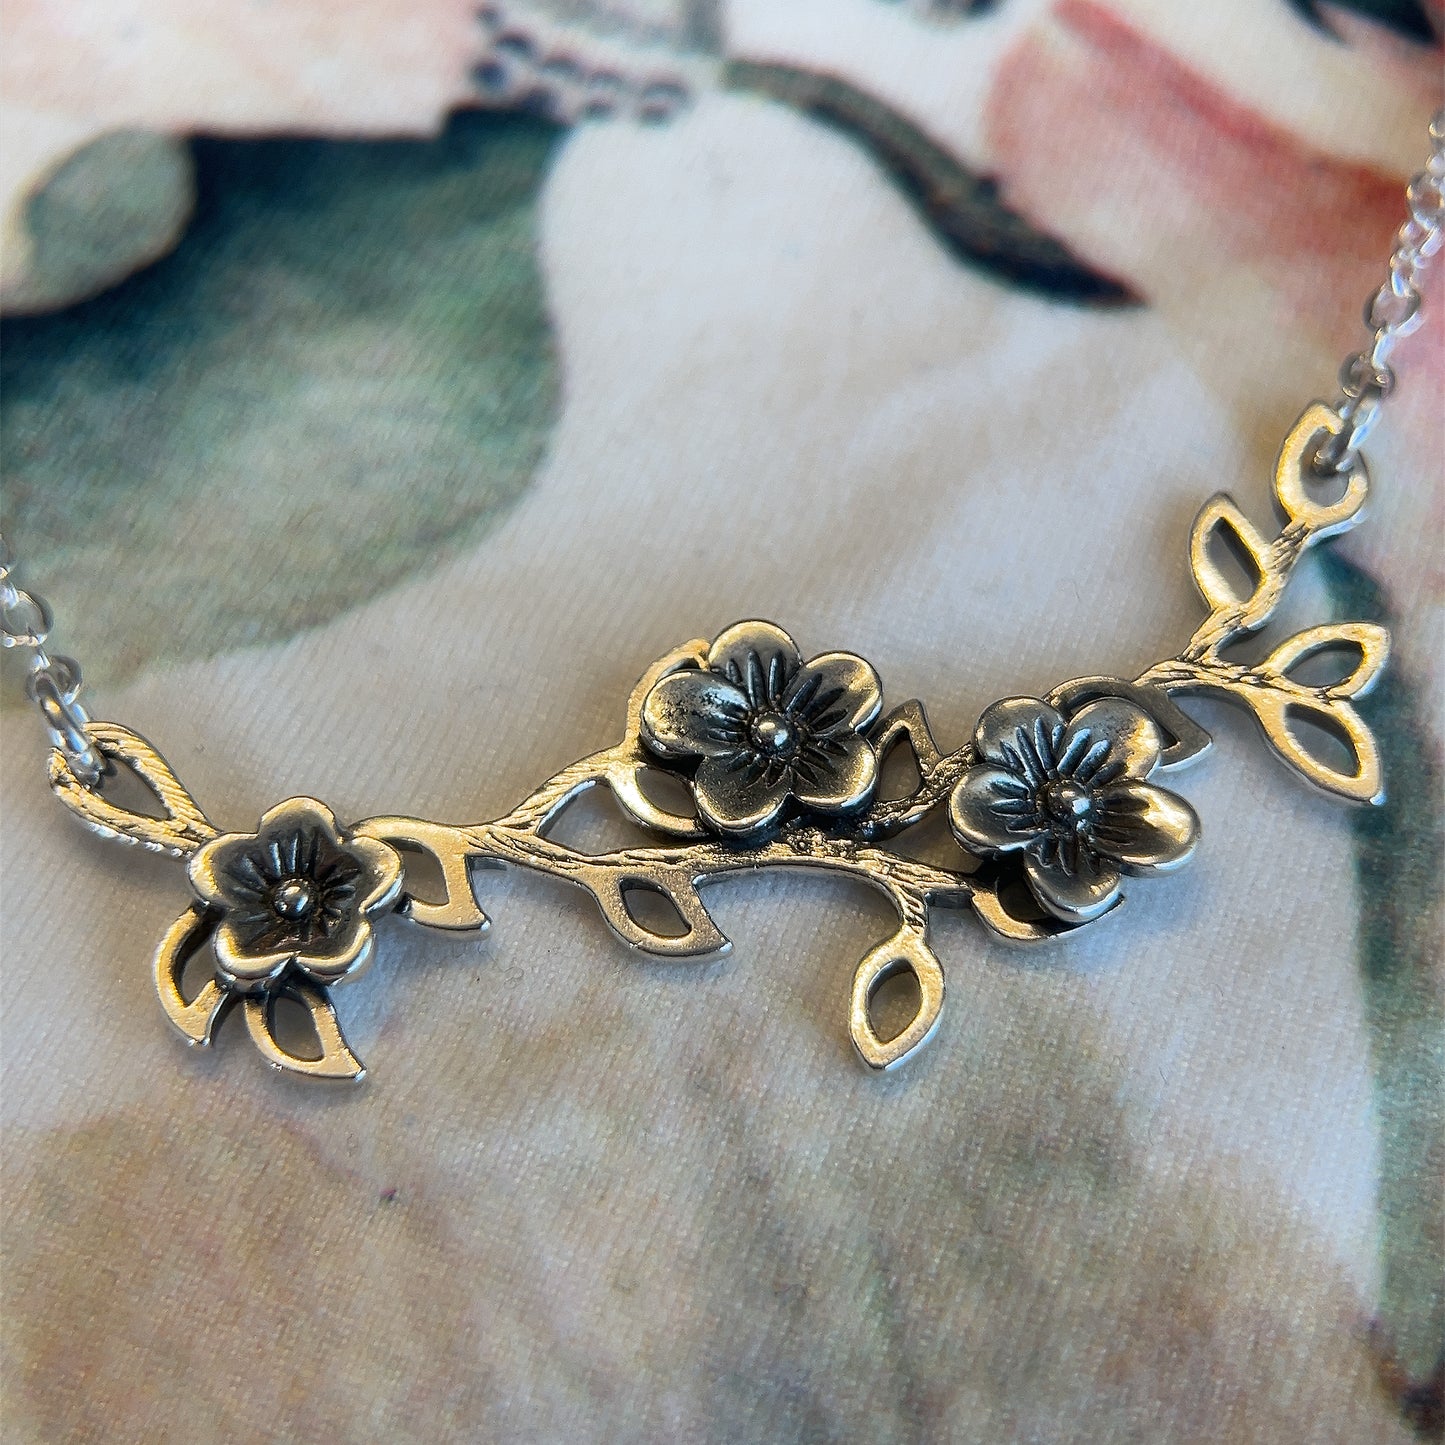 Blossom Branch Necklace